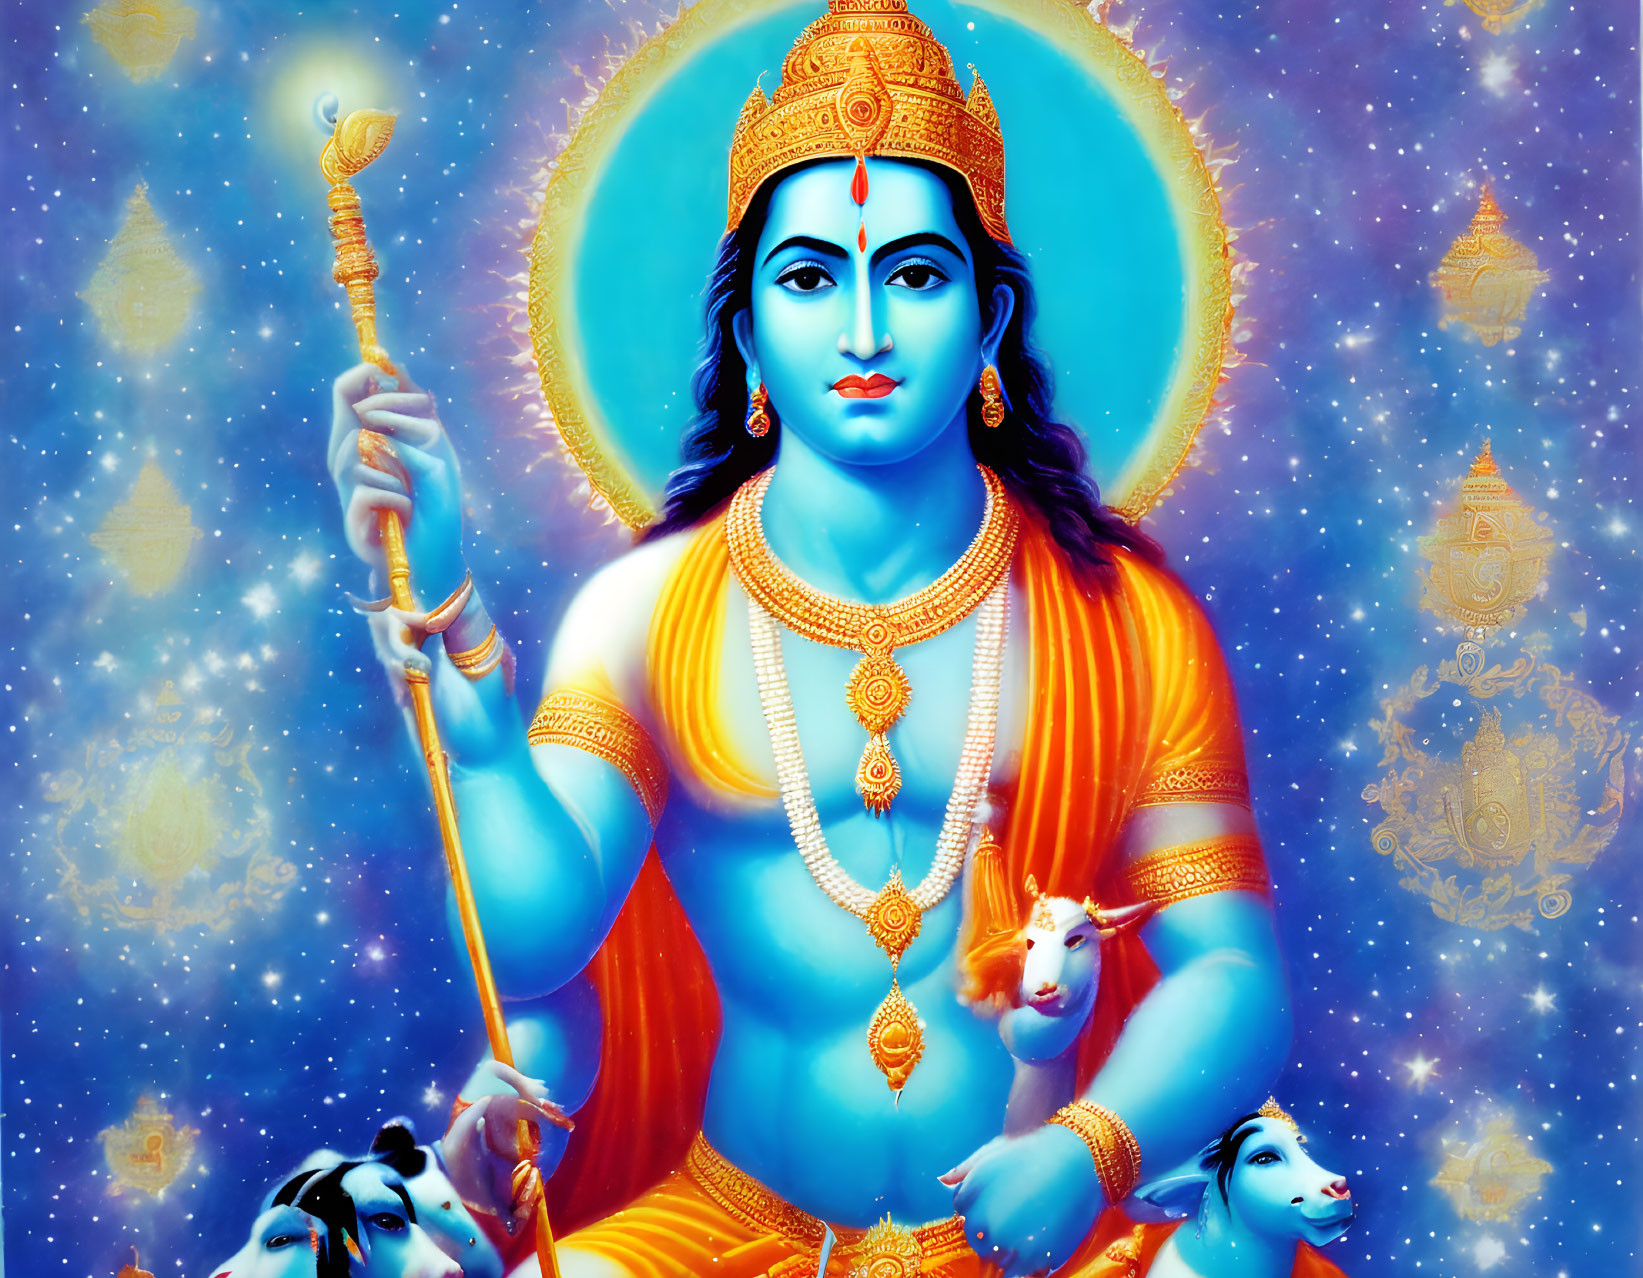 Blue-skinned deity with four arms holding divine symbols in vibrant illustration